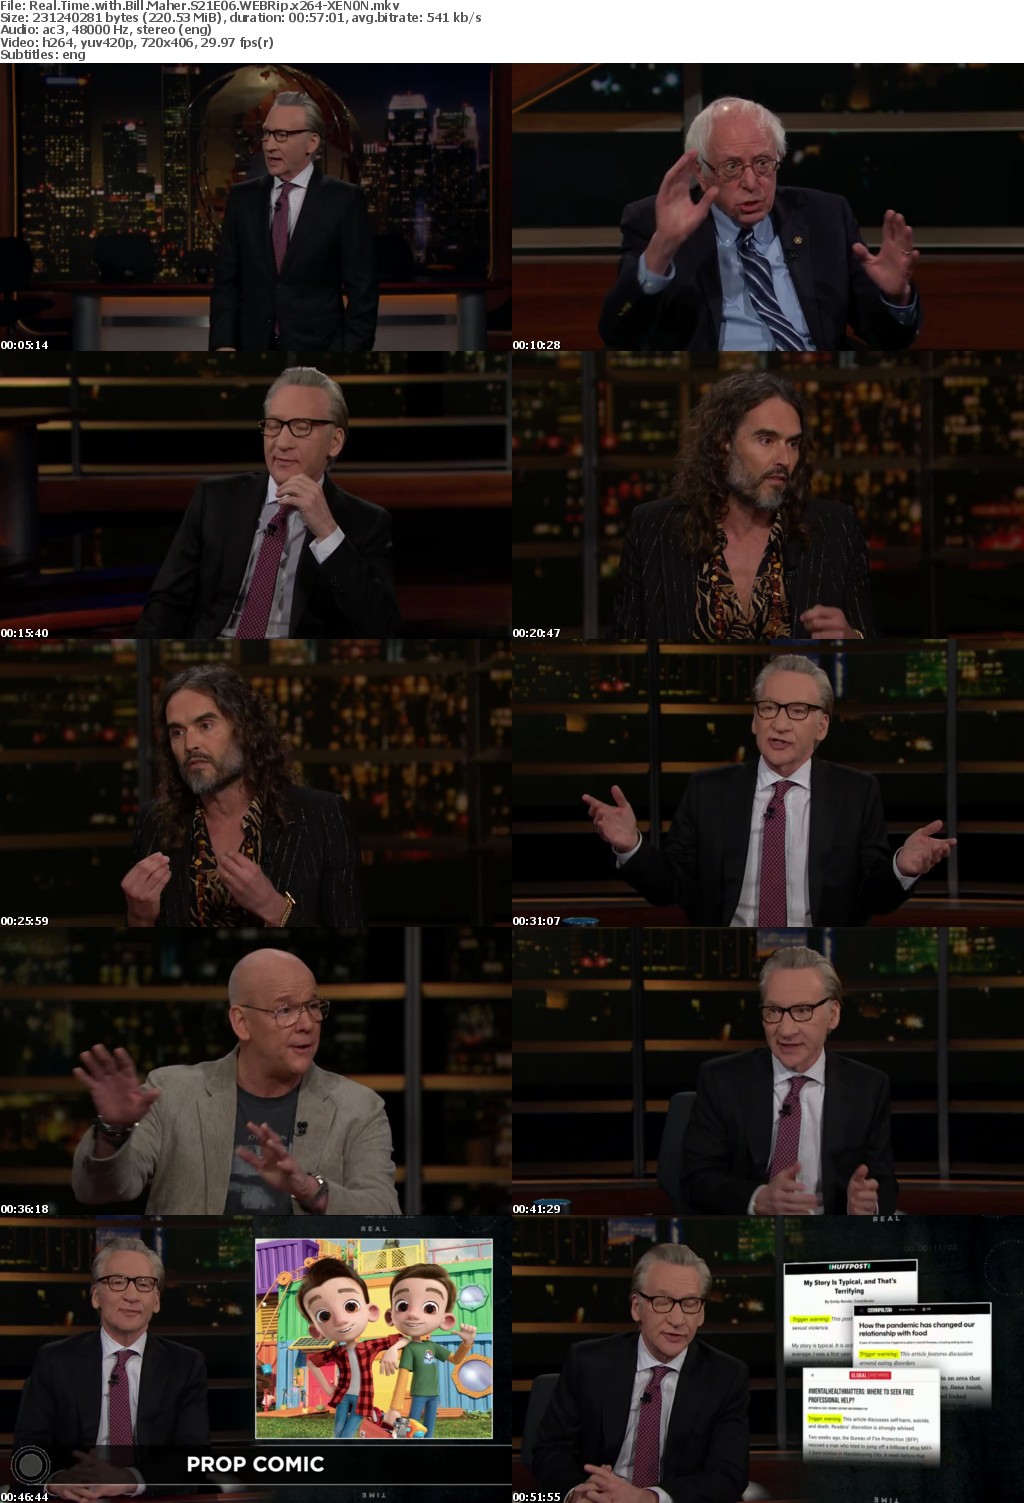 Real Time with Bill Maher S21E06 WEBRip x264-XEN0N